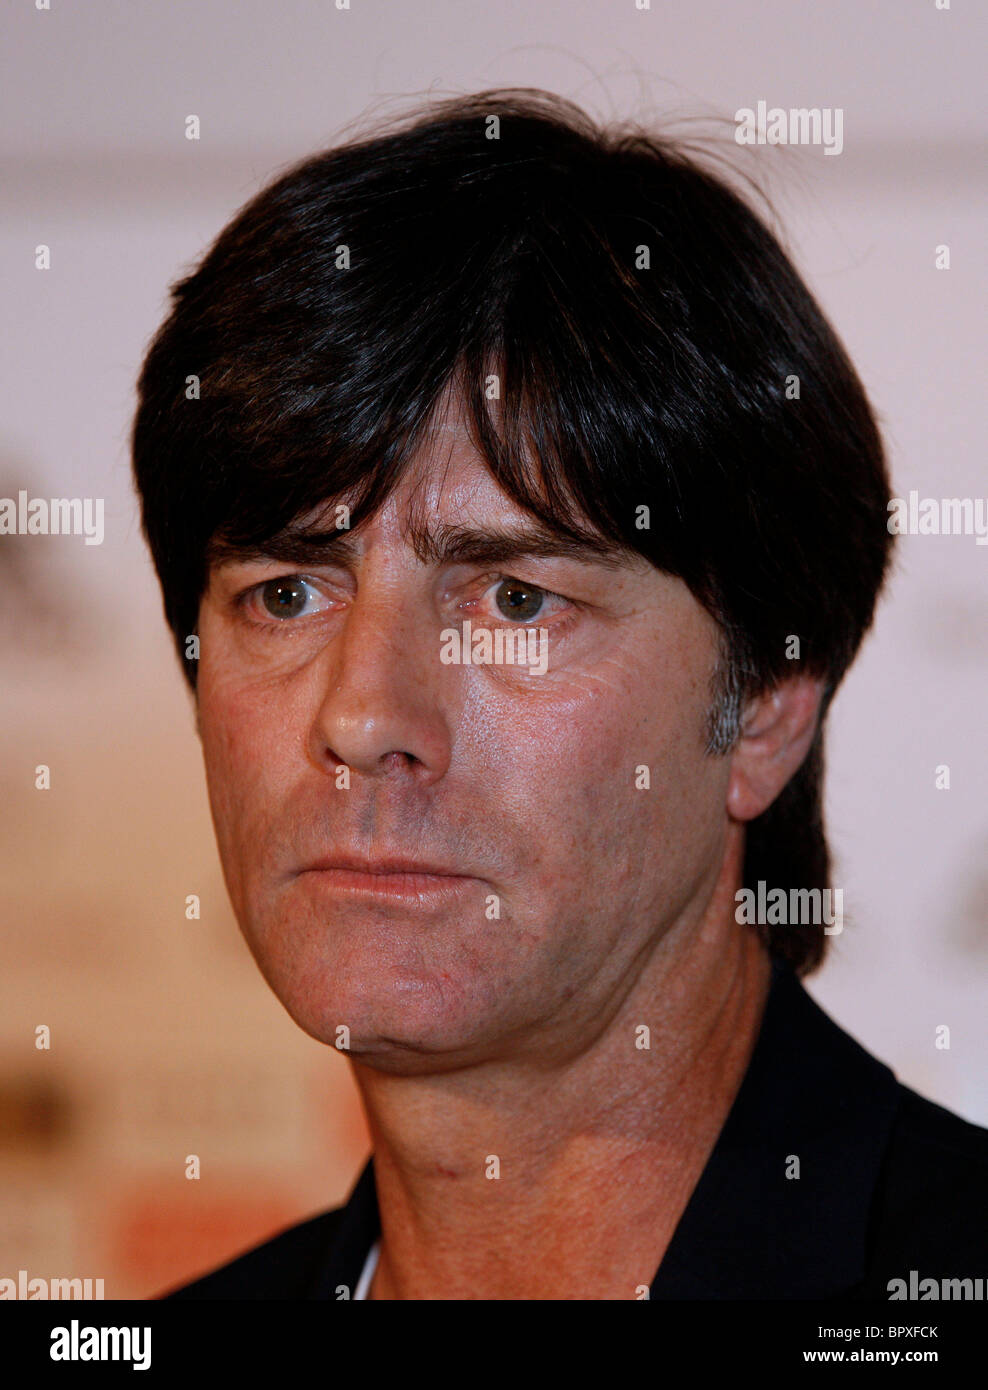 The coach of the german nationalfootball team Joachim Loew during a press conference Stock Photo